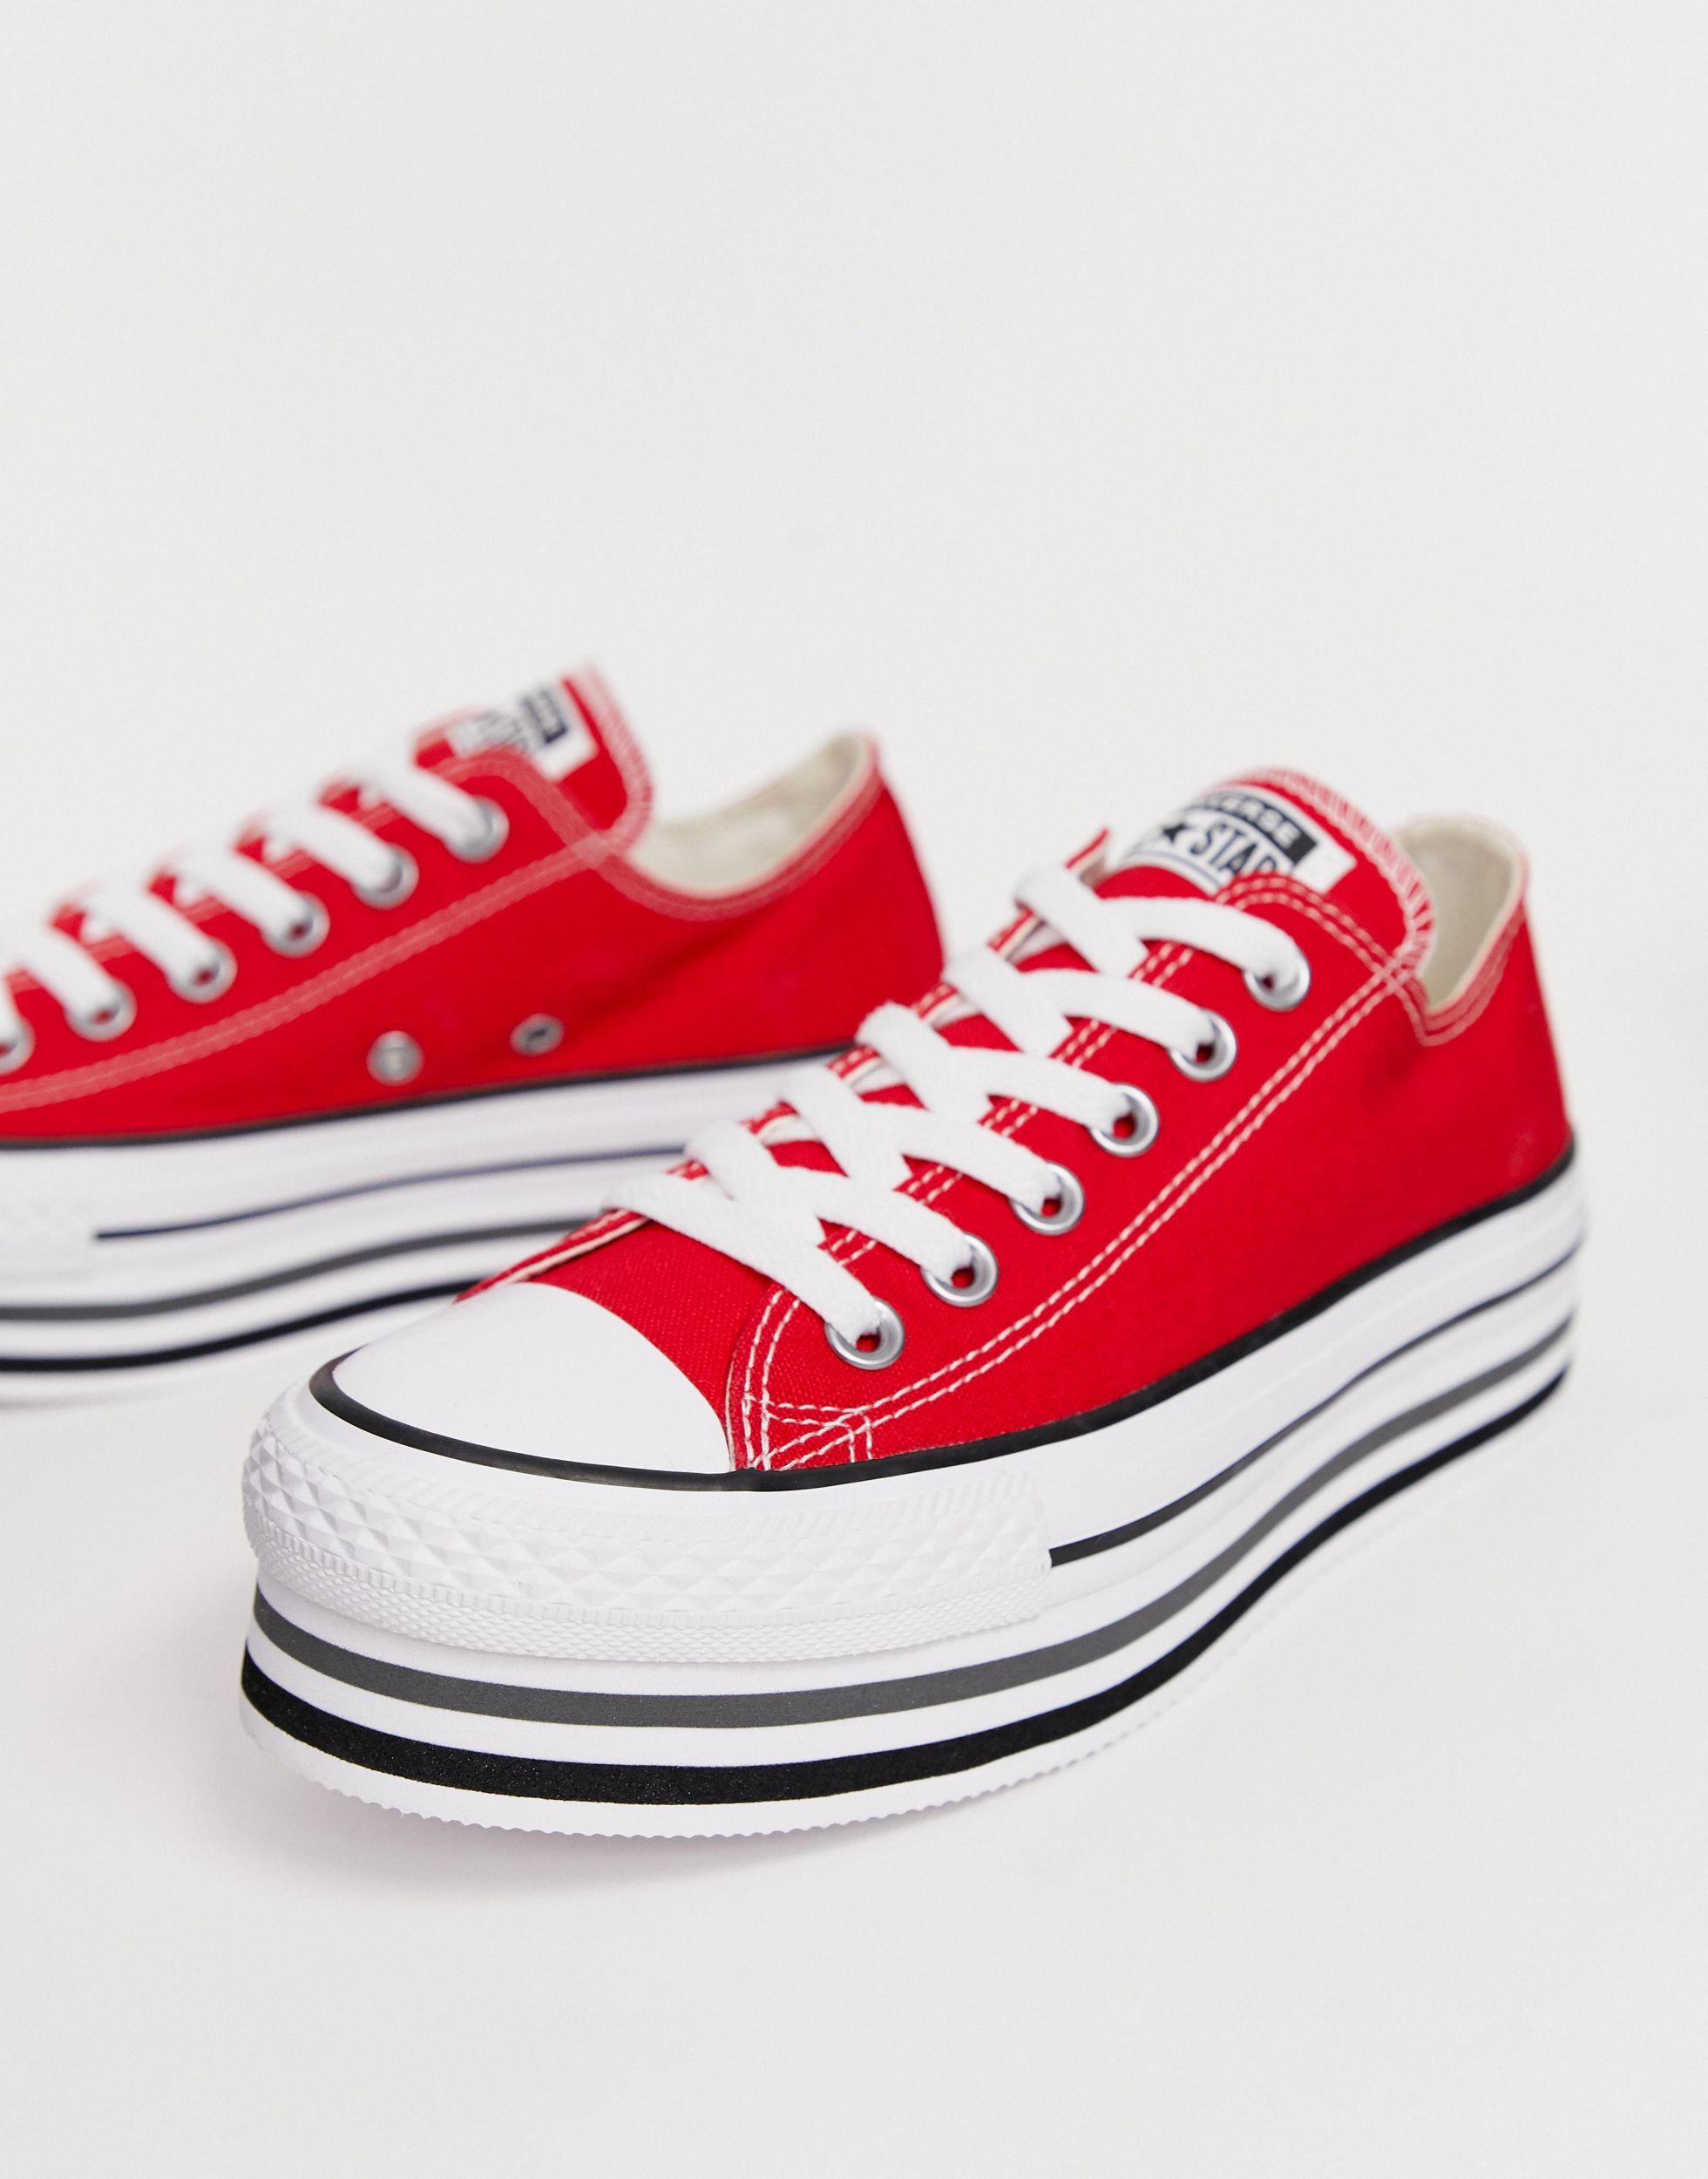 Converse Canvas Chuck Taylor All Star Platform Layer Red Trainers - Lyst